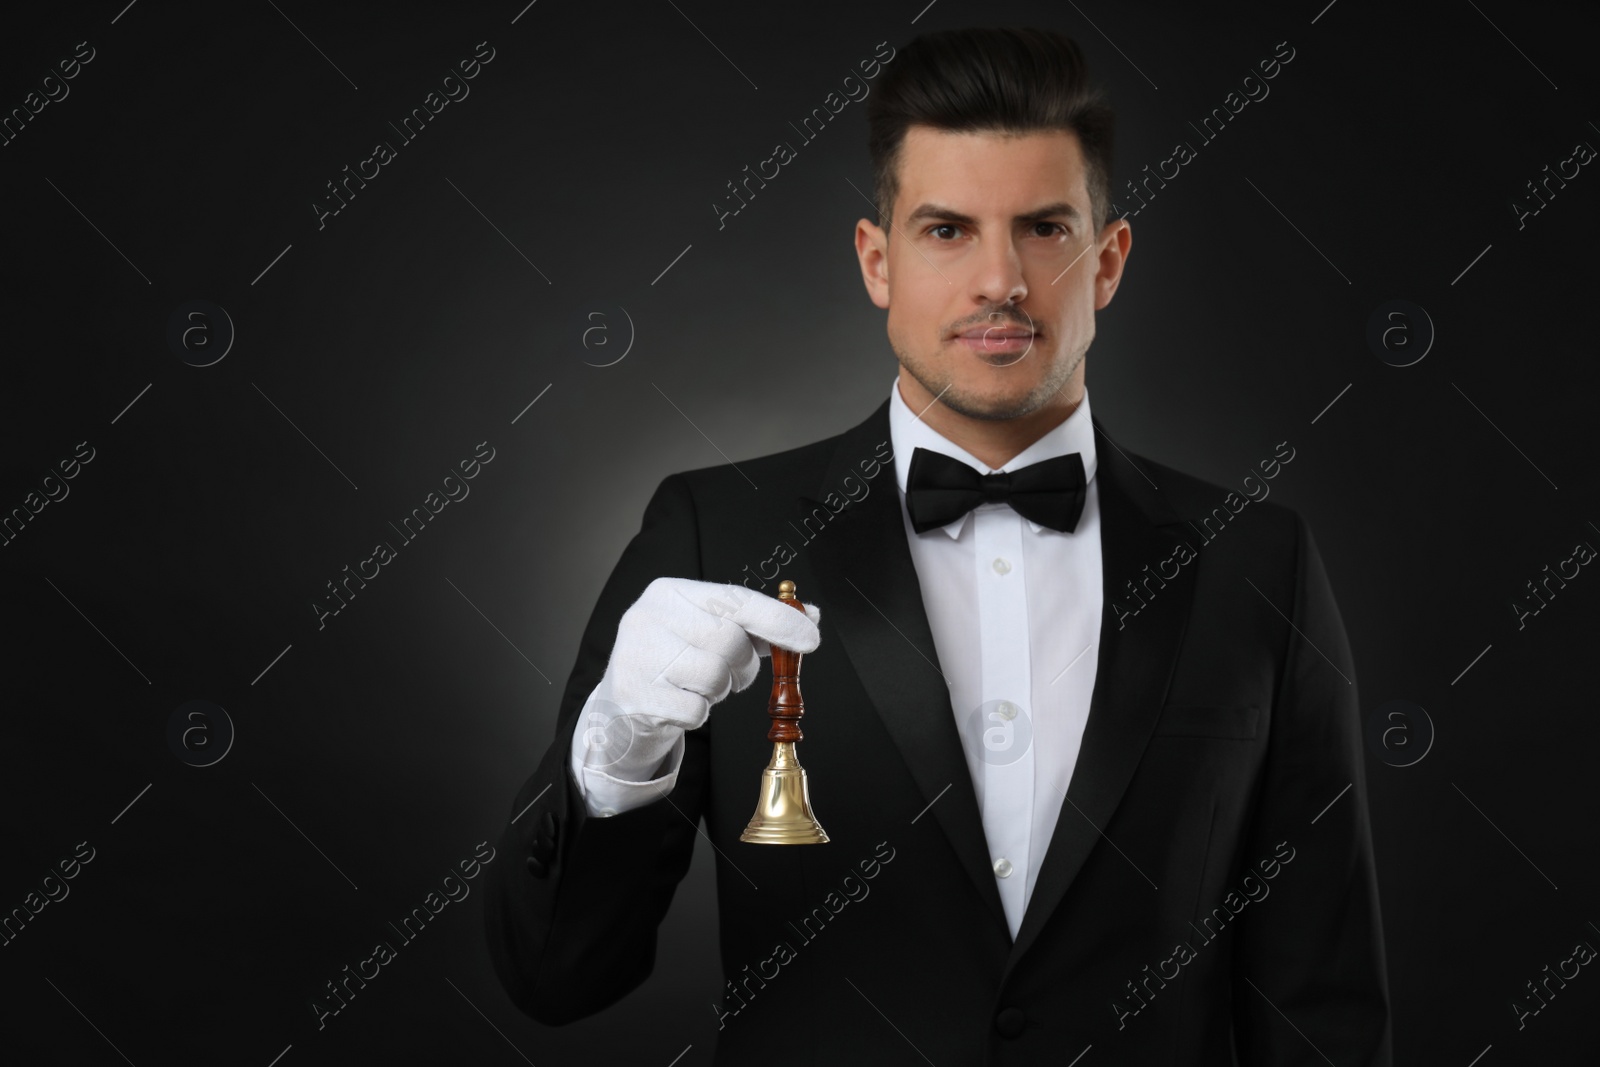 Photo of Butler holding hand bell on black background, space for text